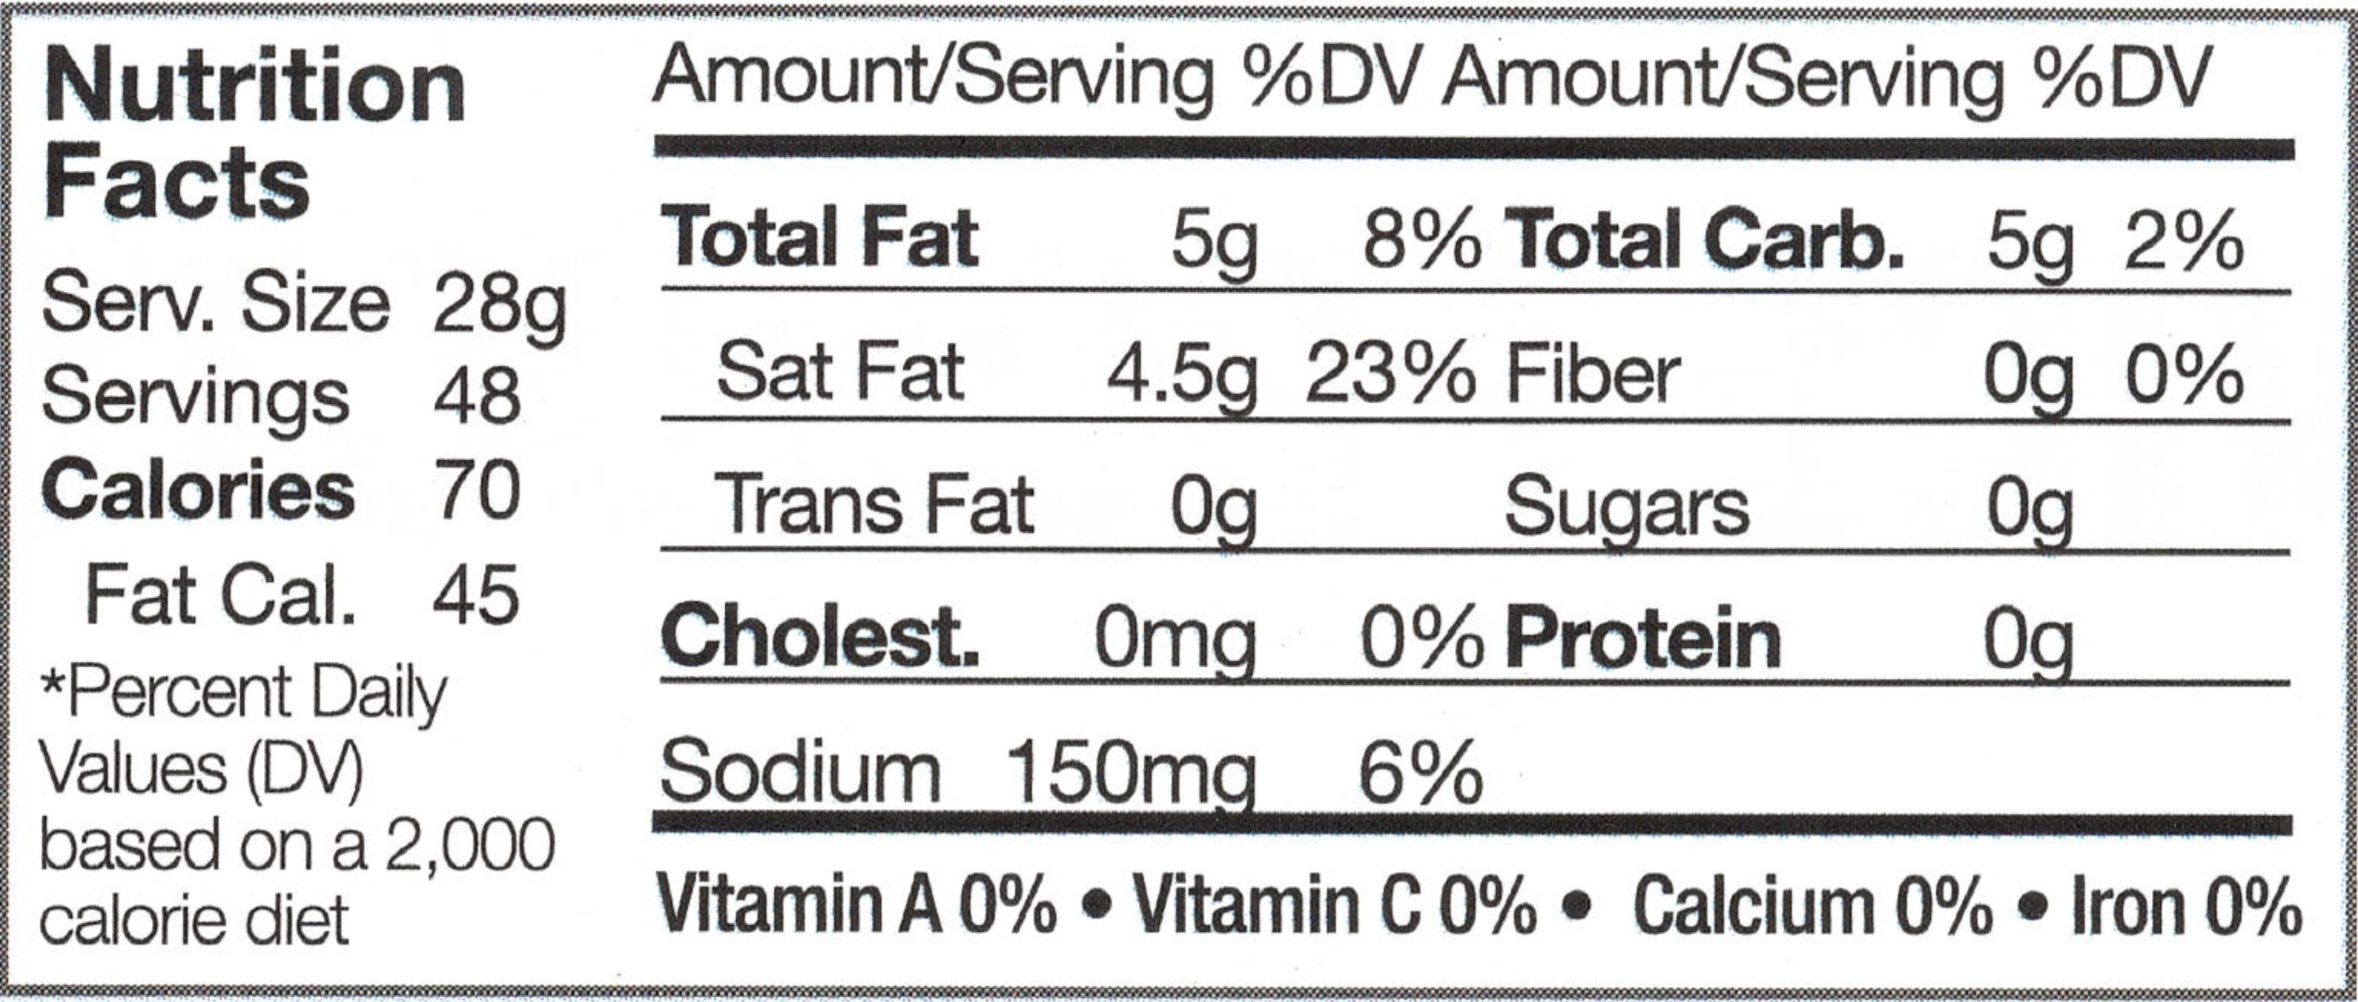 Serving Size: 28g, Servings: 48, Calories: 70 ,Fat Calories: 45, *Percent Daily Value (DV) based on a 2,000 calorie diet, Anmount/Serving, % DV, Total Fat: 5g, 8%, Saturated Fat: 4.5g, 23%, Trans Fat: 0g, Cholesterol: 0mg 0%, Sodium: 150mg, 6%, Total Carbohydrates: 5g, 2%, Fiber: 0g, 0%, Sugars: 0g, Protein, 0g, Vitamin A: 0%, Vitamin C: 0%, Calcium: 0%, Iron: 0%